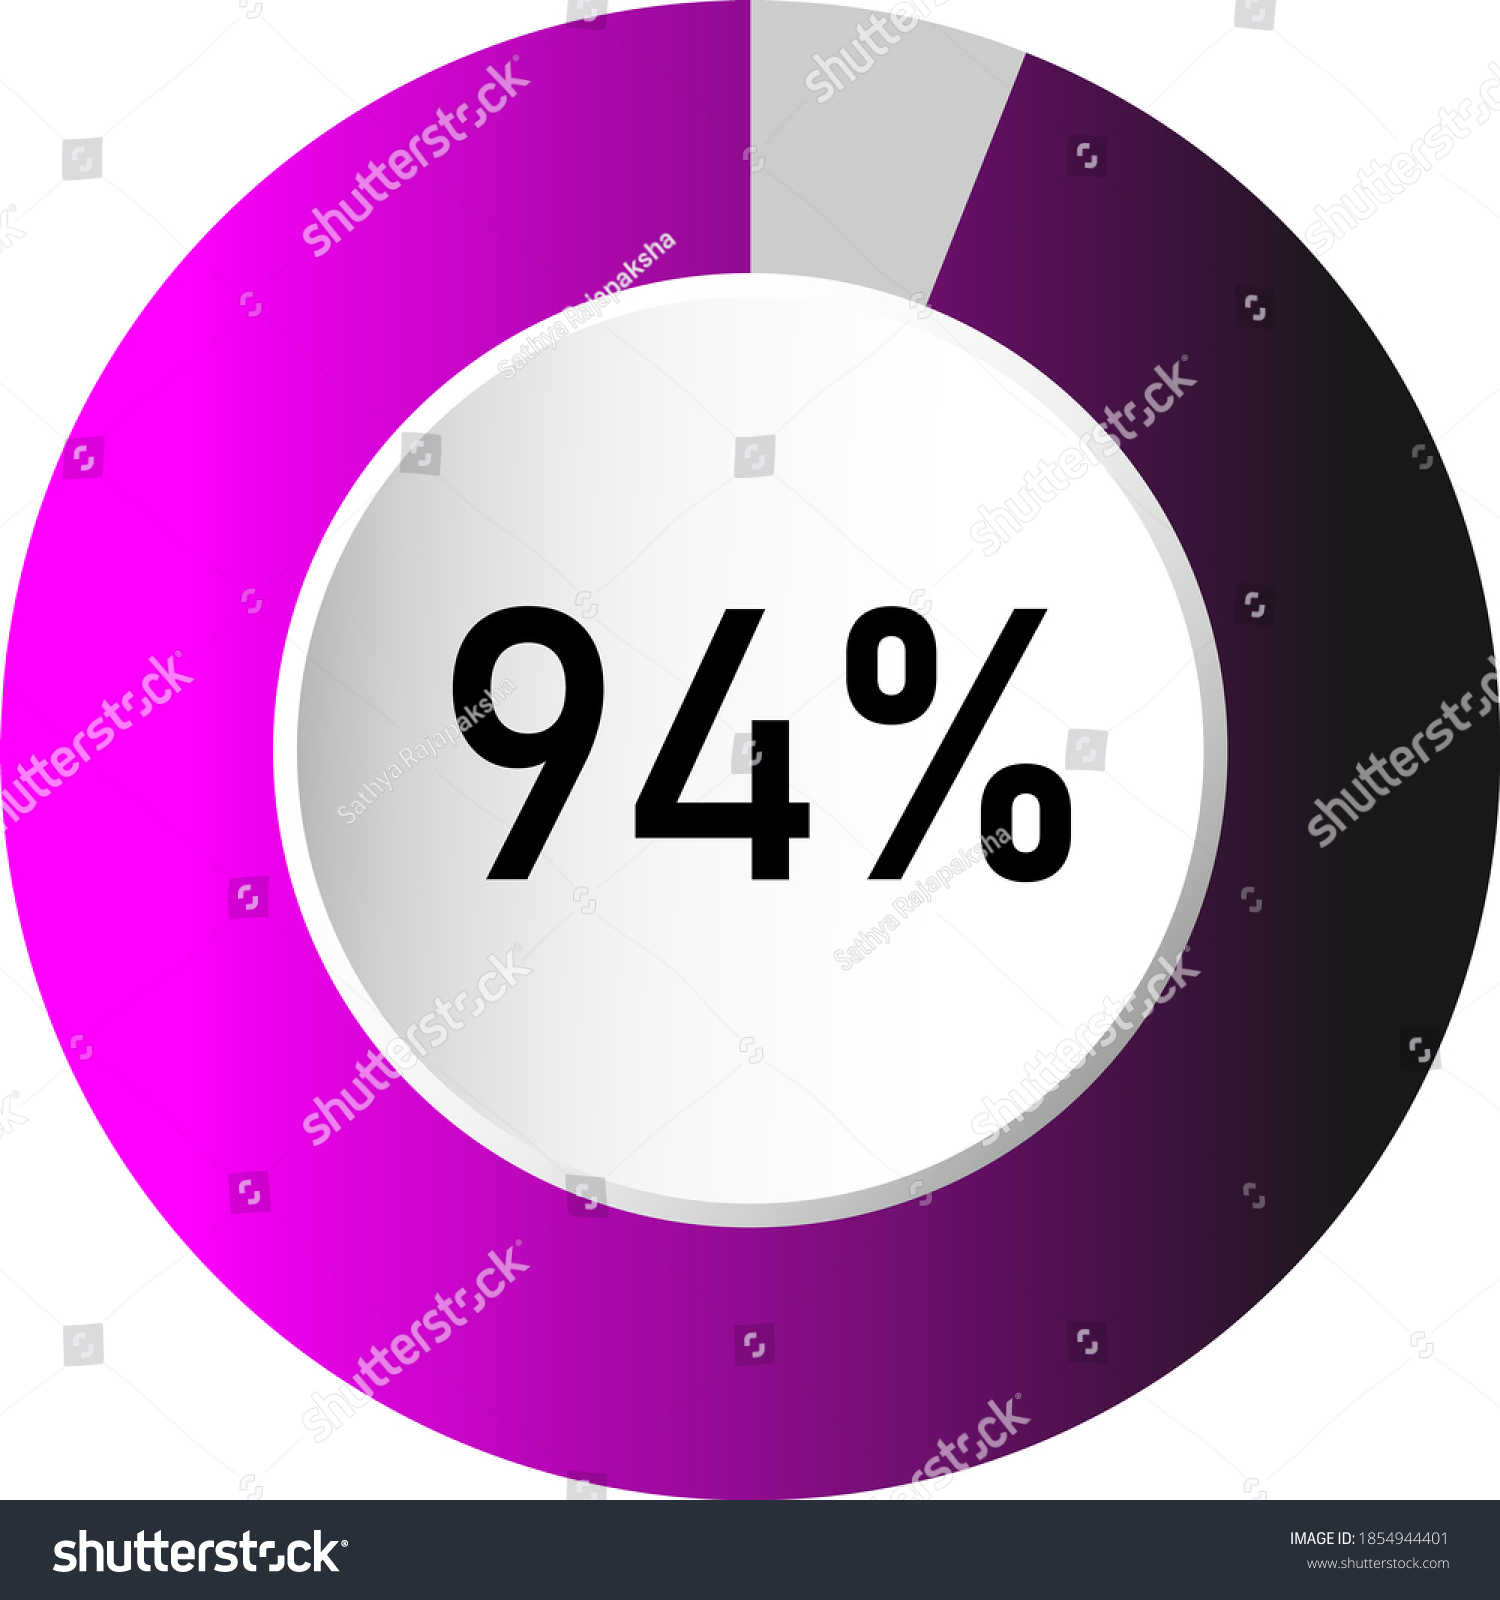 SVG of 94% circle percentage diagrams (meters) ready-to-use for web design, user interface (UI) or infographic - indicator with gradient from purple to black svg